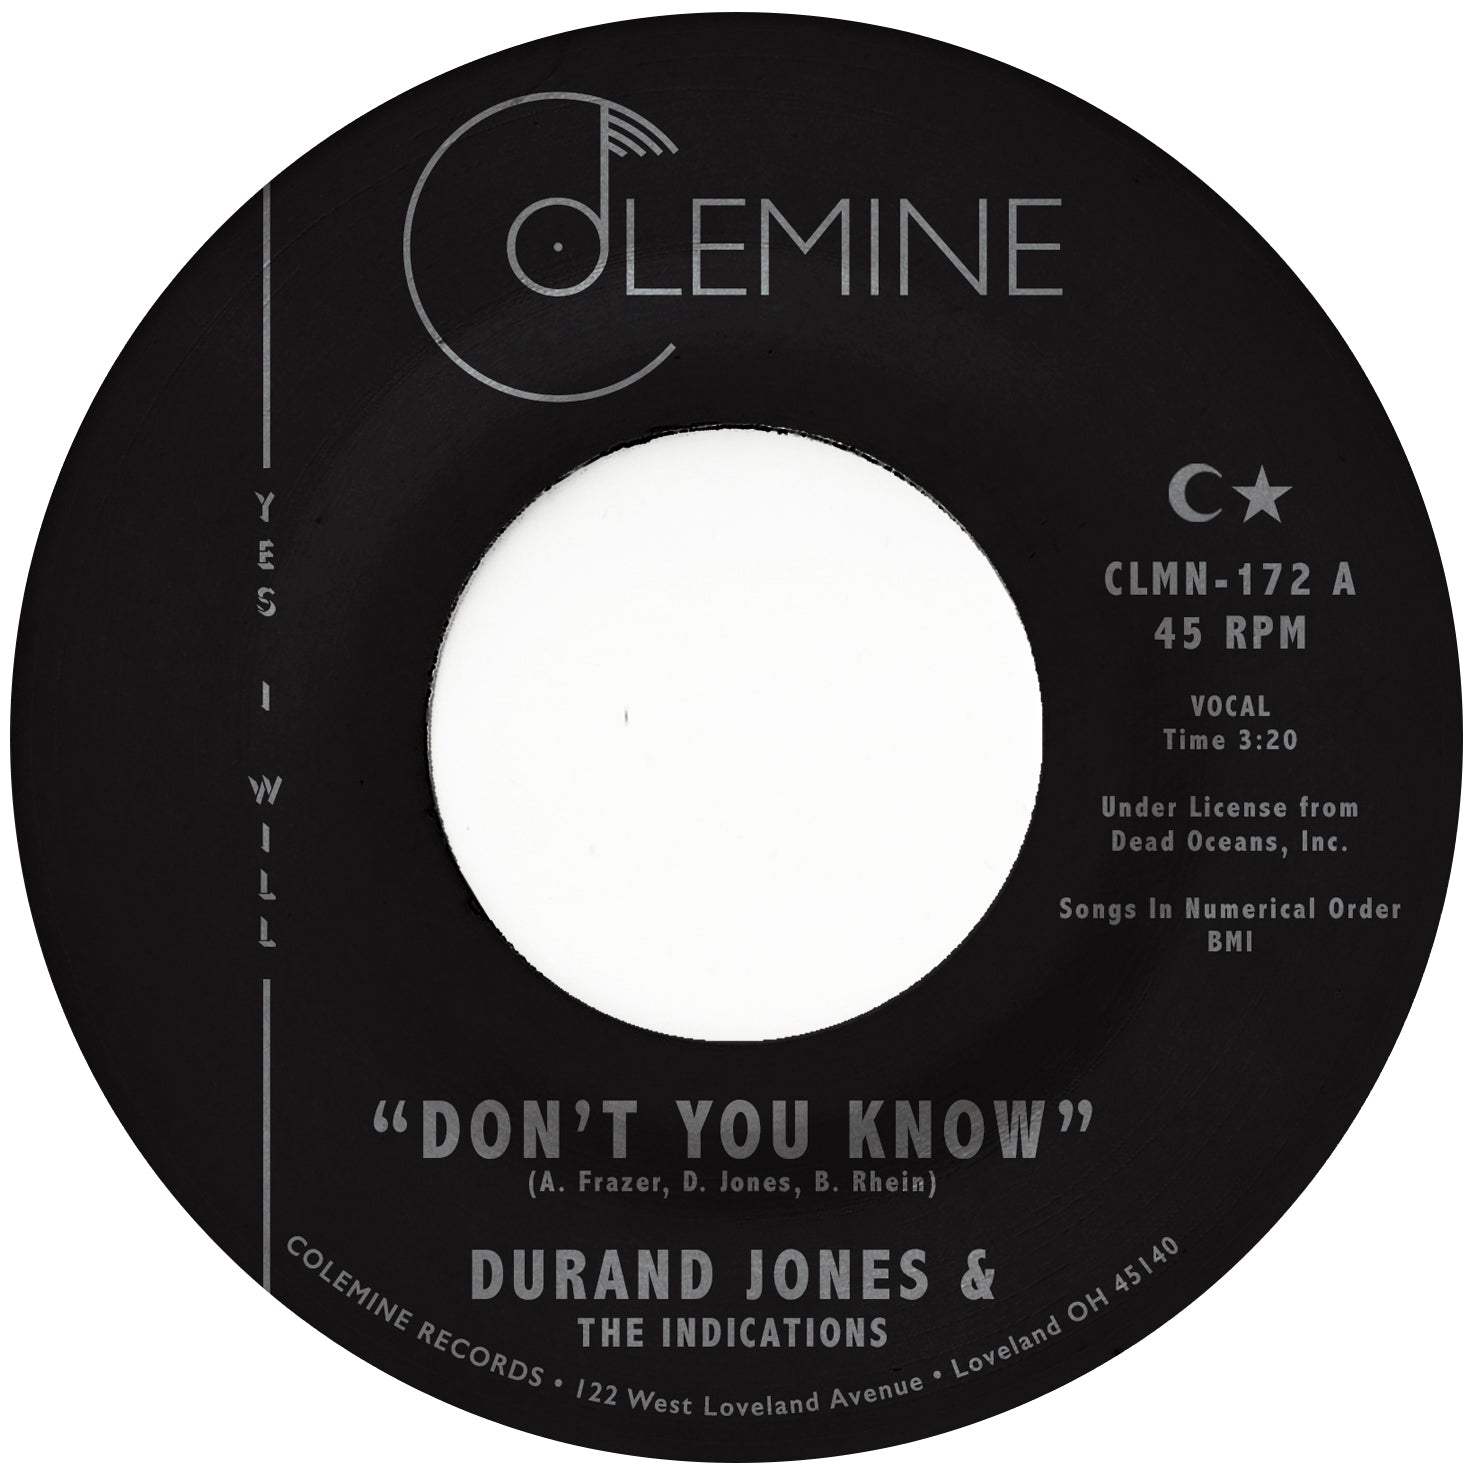 Durand Jones & The Indications - Don't You Know b/w True Love